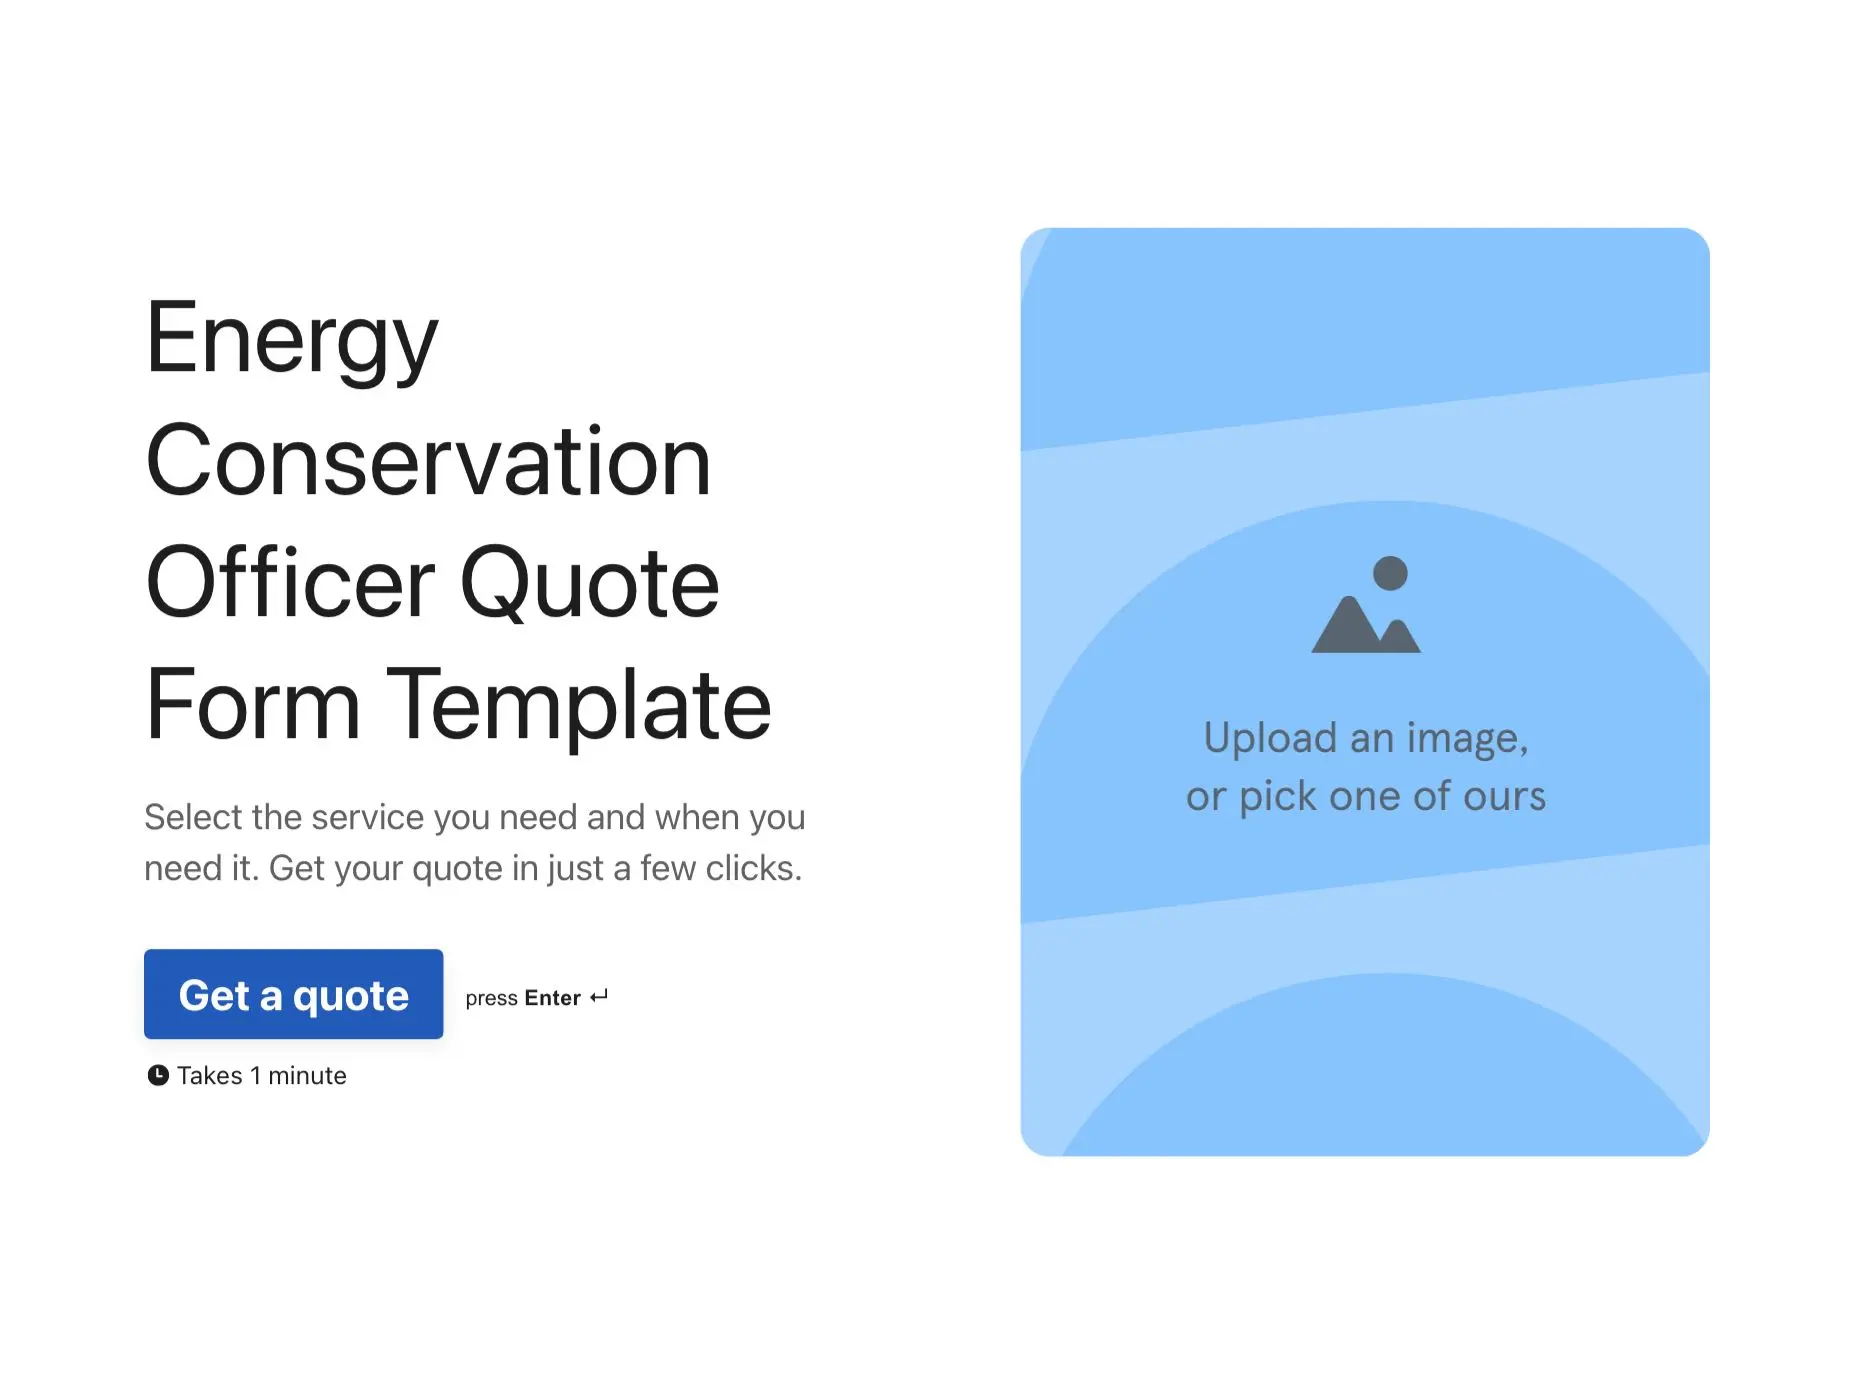 Energy Conservation Officer Quote Form Template Hero